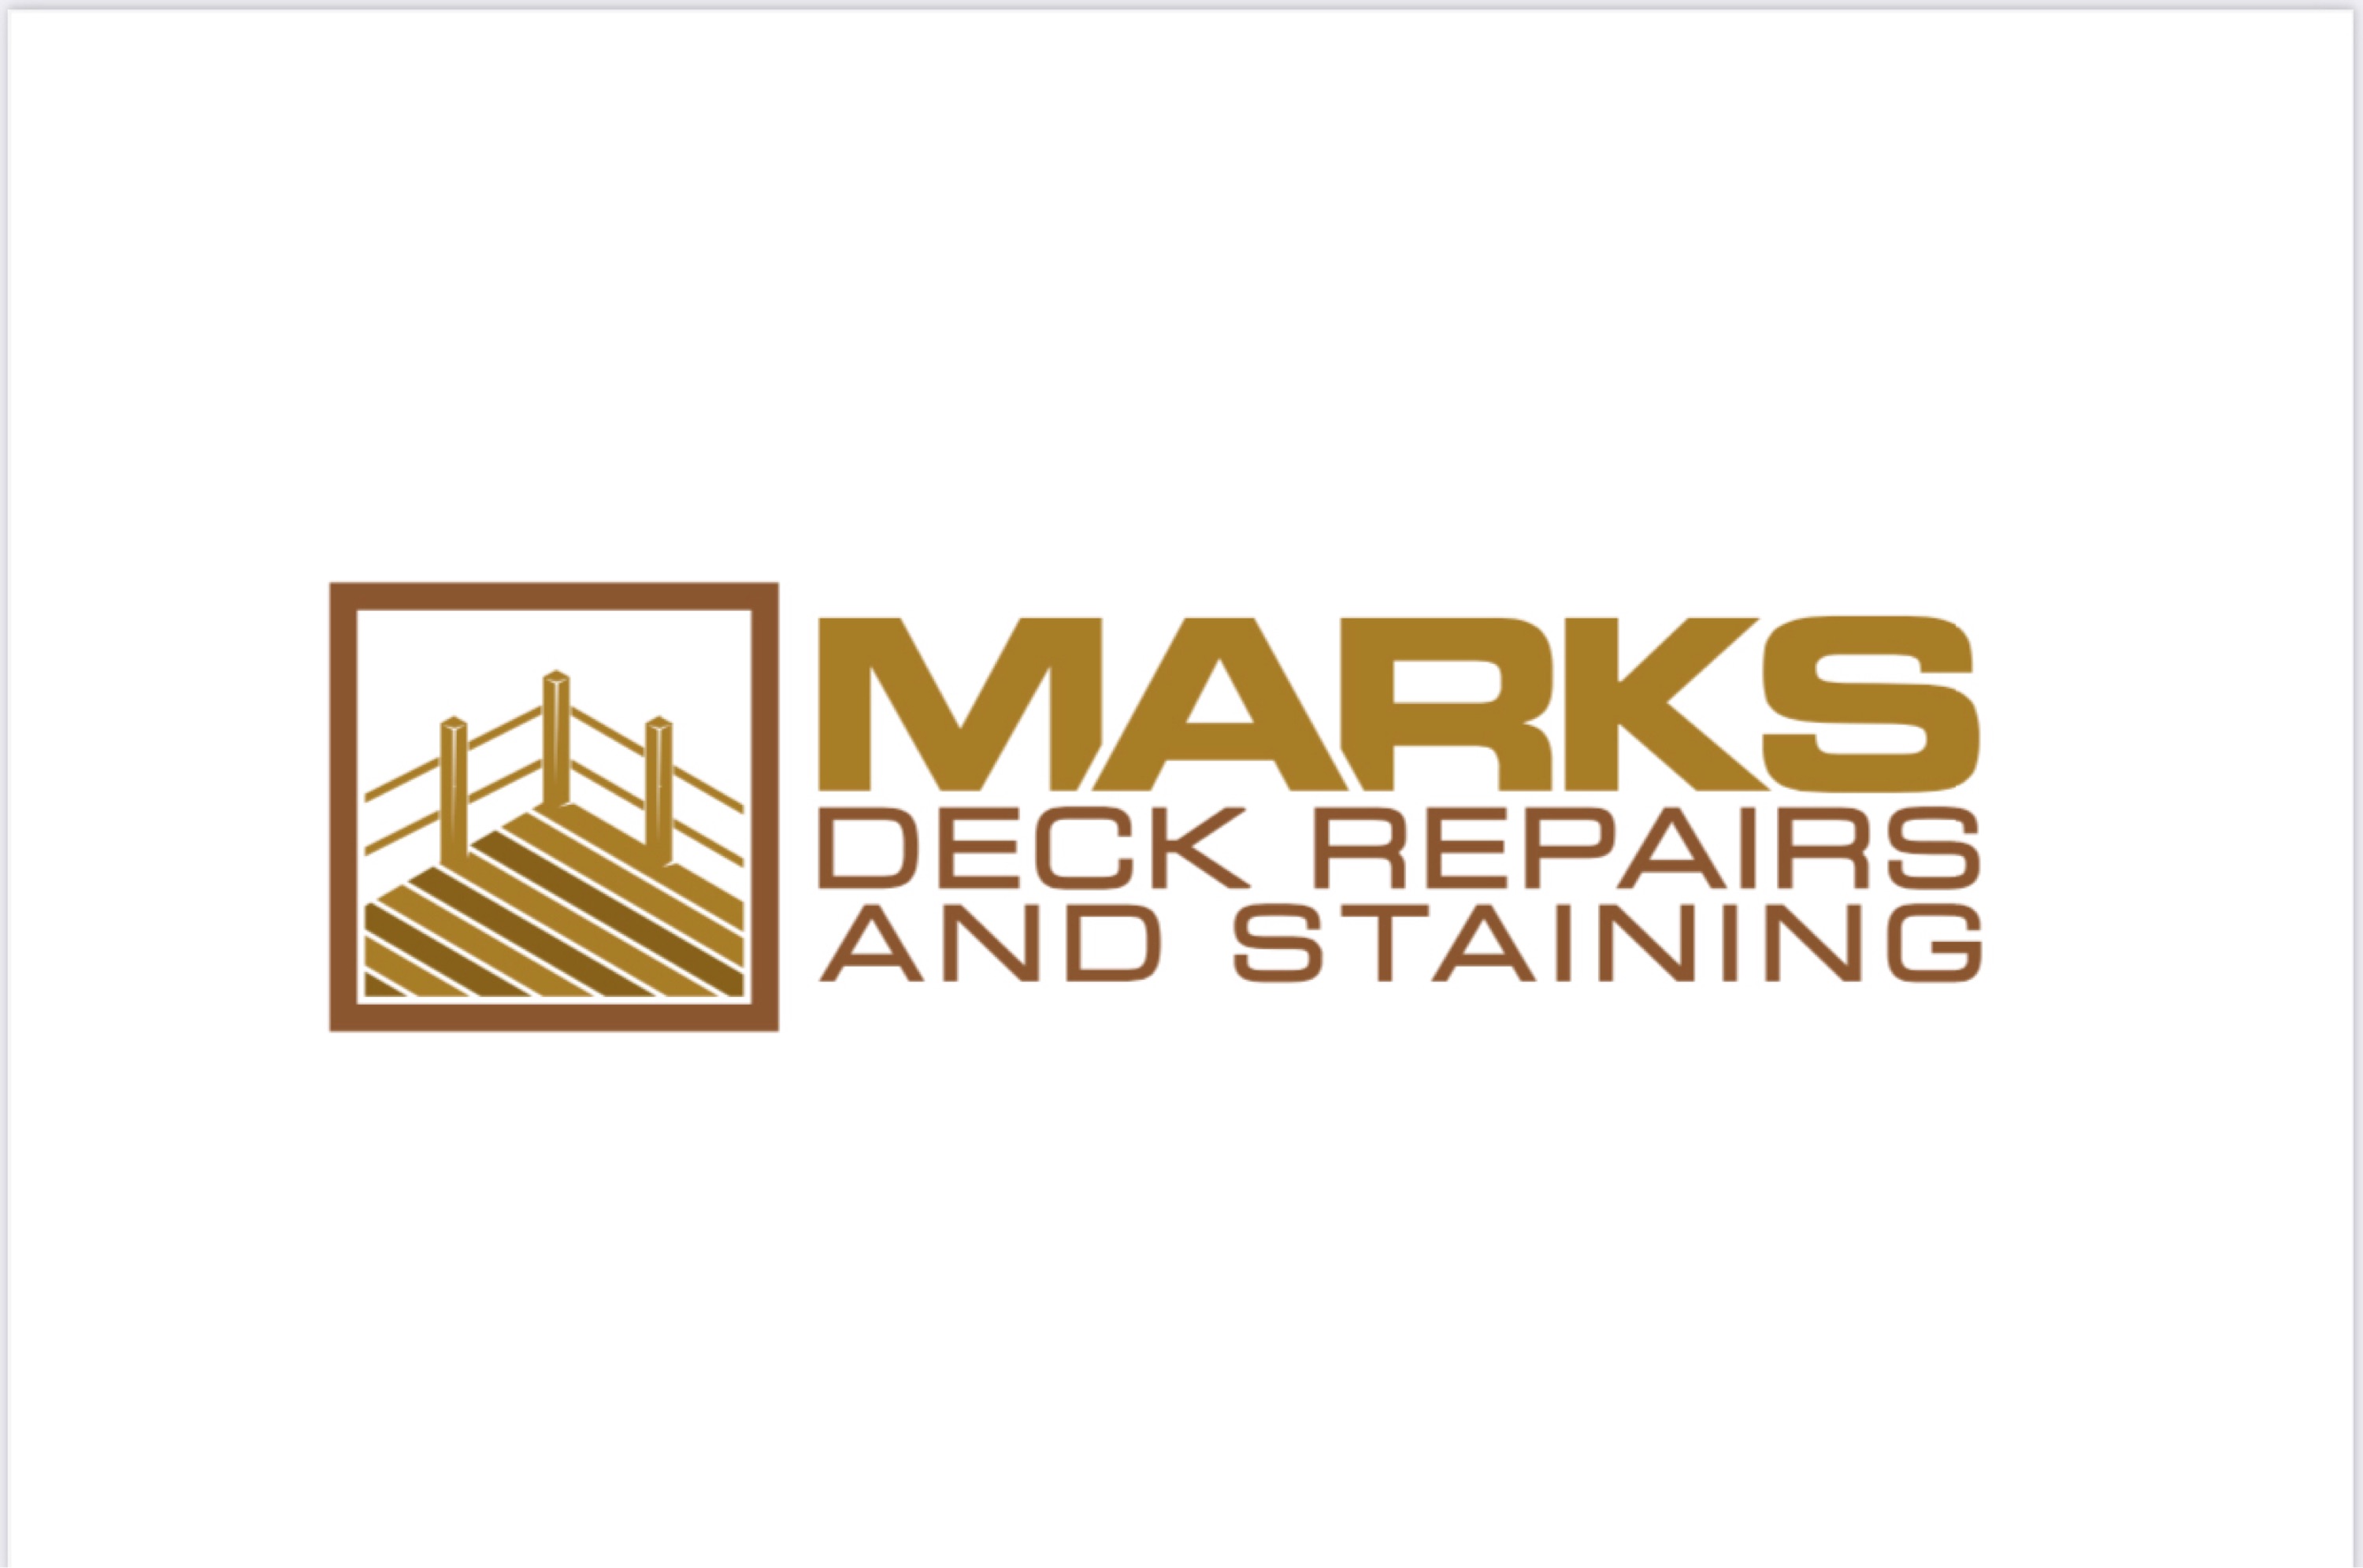 Mark's Deck Repairs and Staining Logo